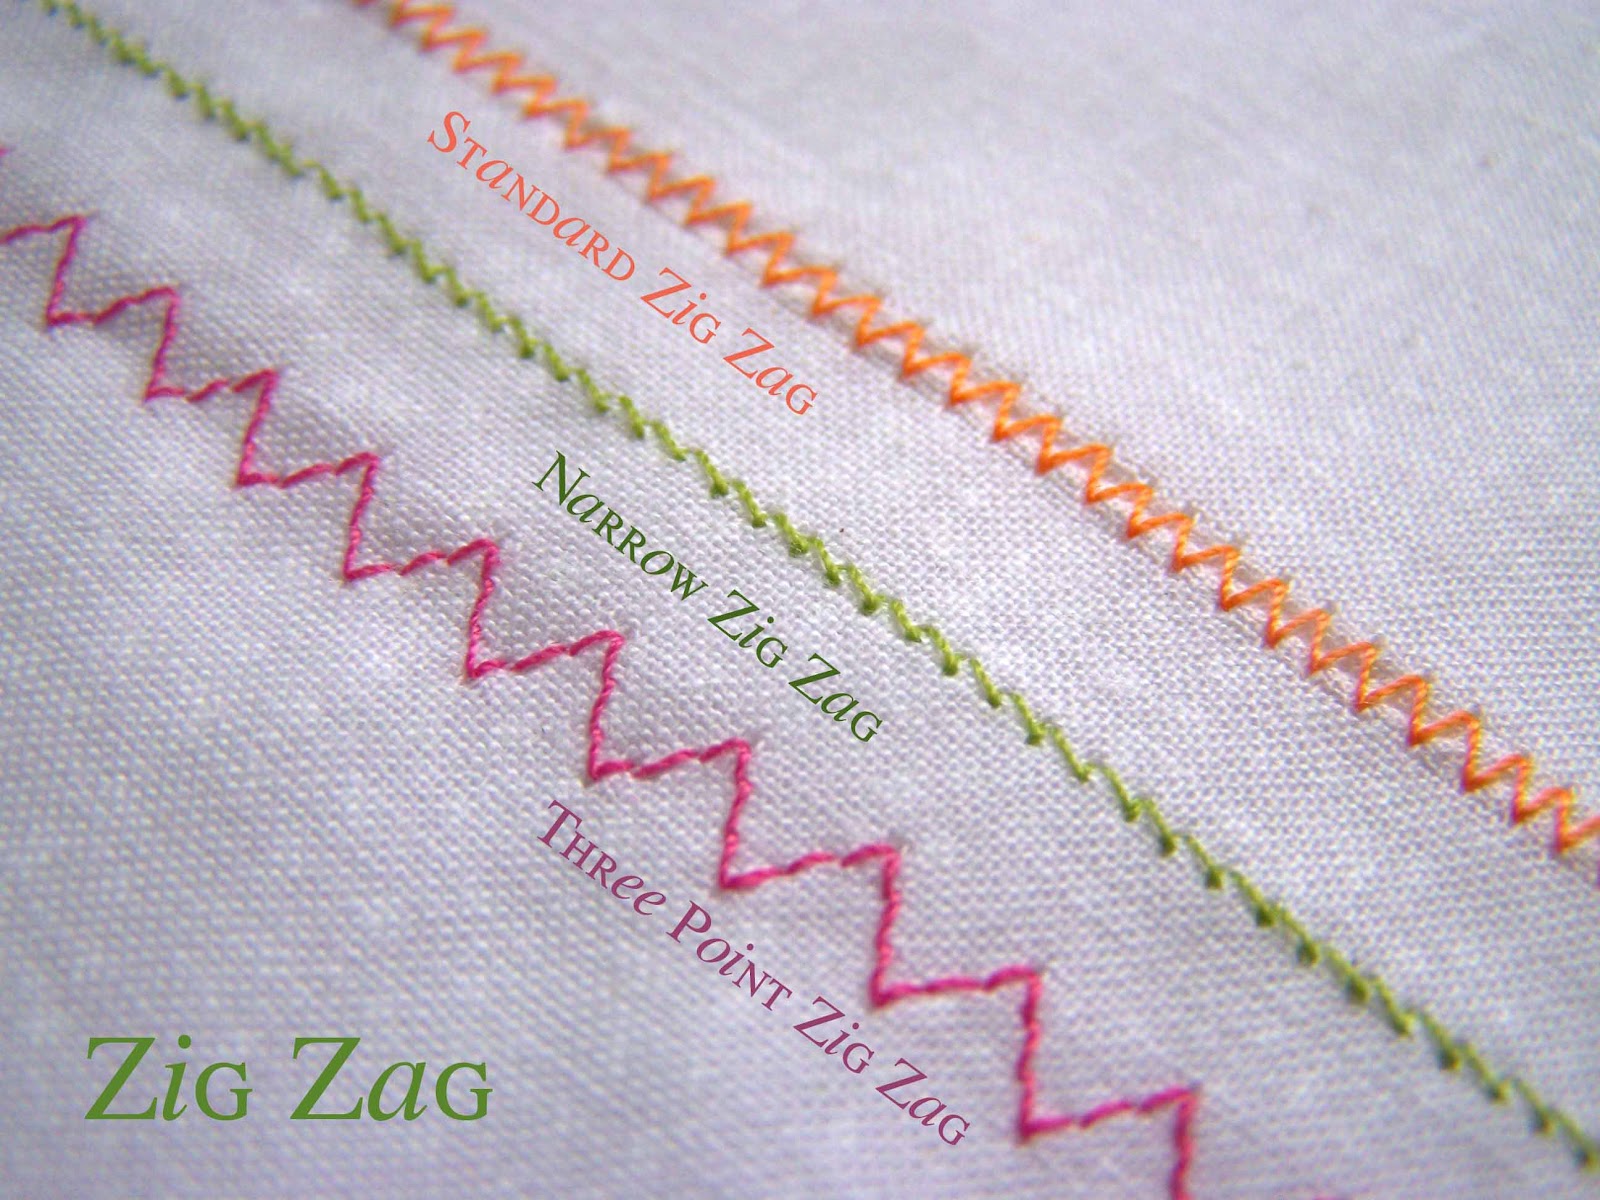 Made by Me. Shared with you.: Technique Tuesday: Zig Zag Stitching